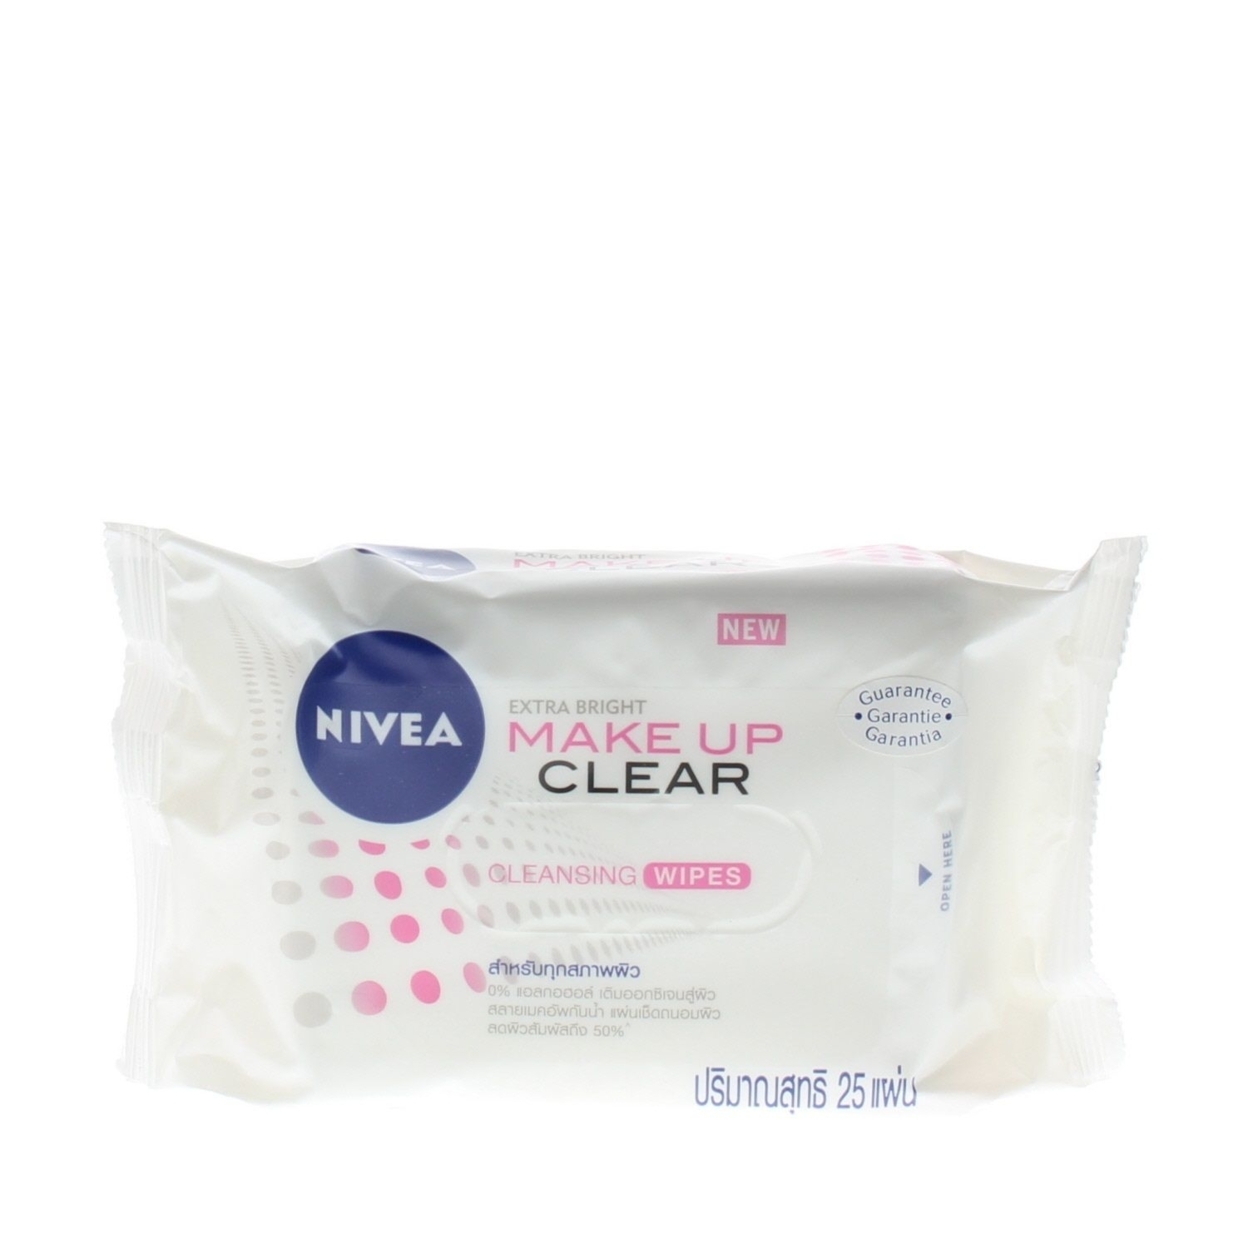 Nivea Make Up Clear Cleansing Wipes (25 Wipes)